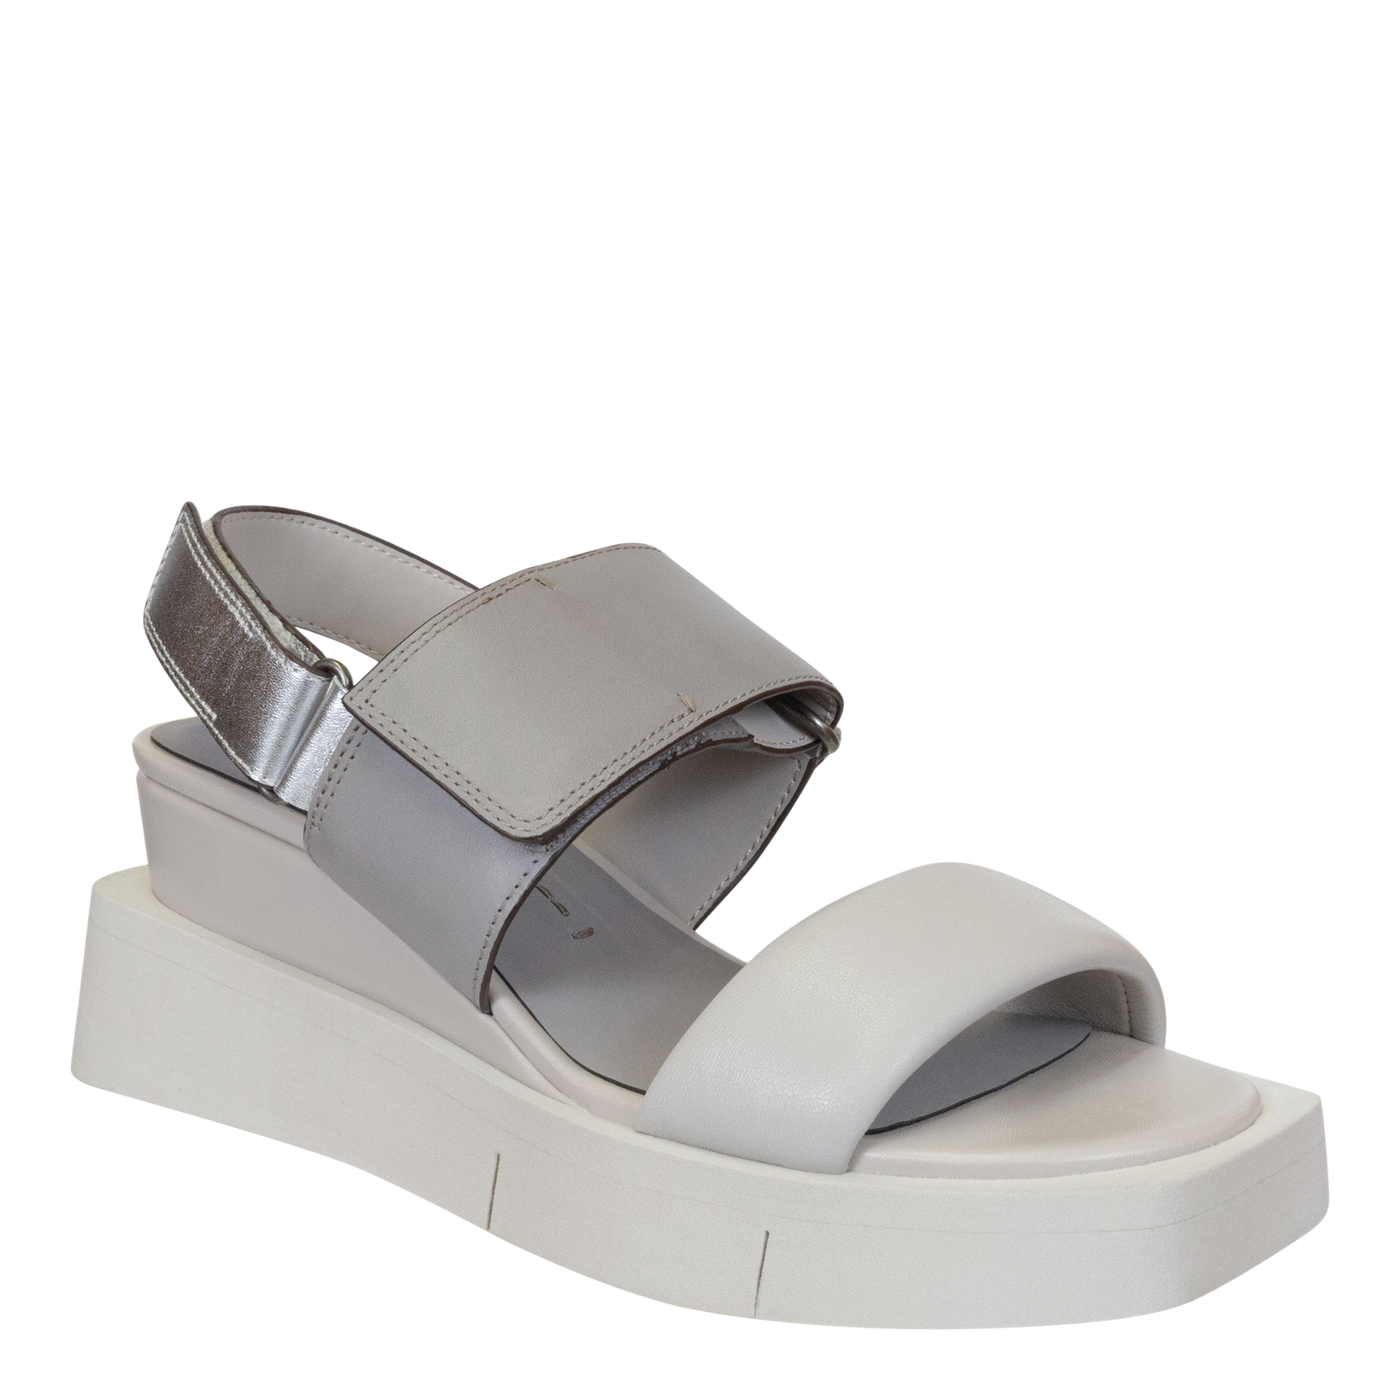 NAKED FEET - PARADOX in GREY Wedge Sandals